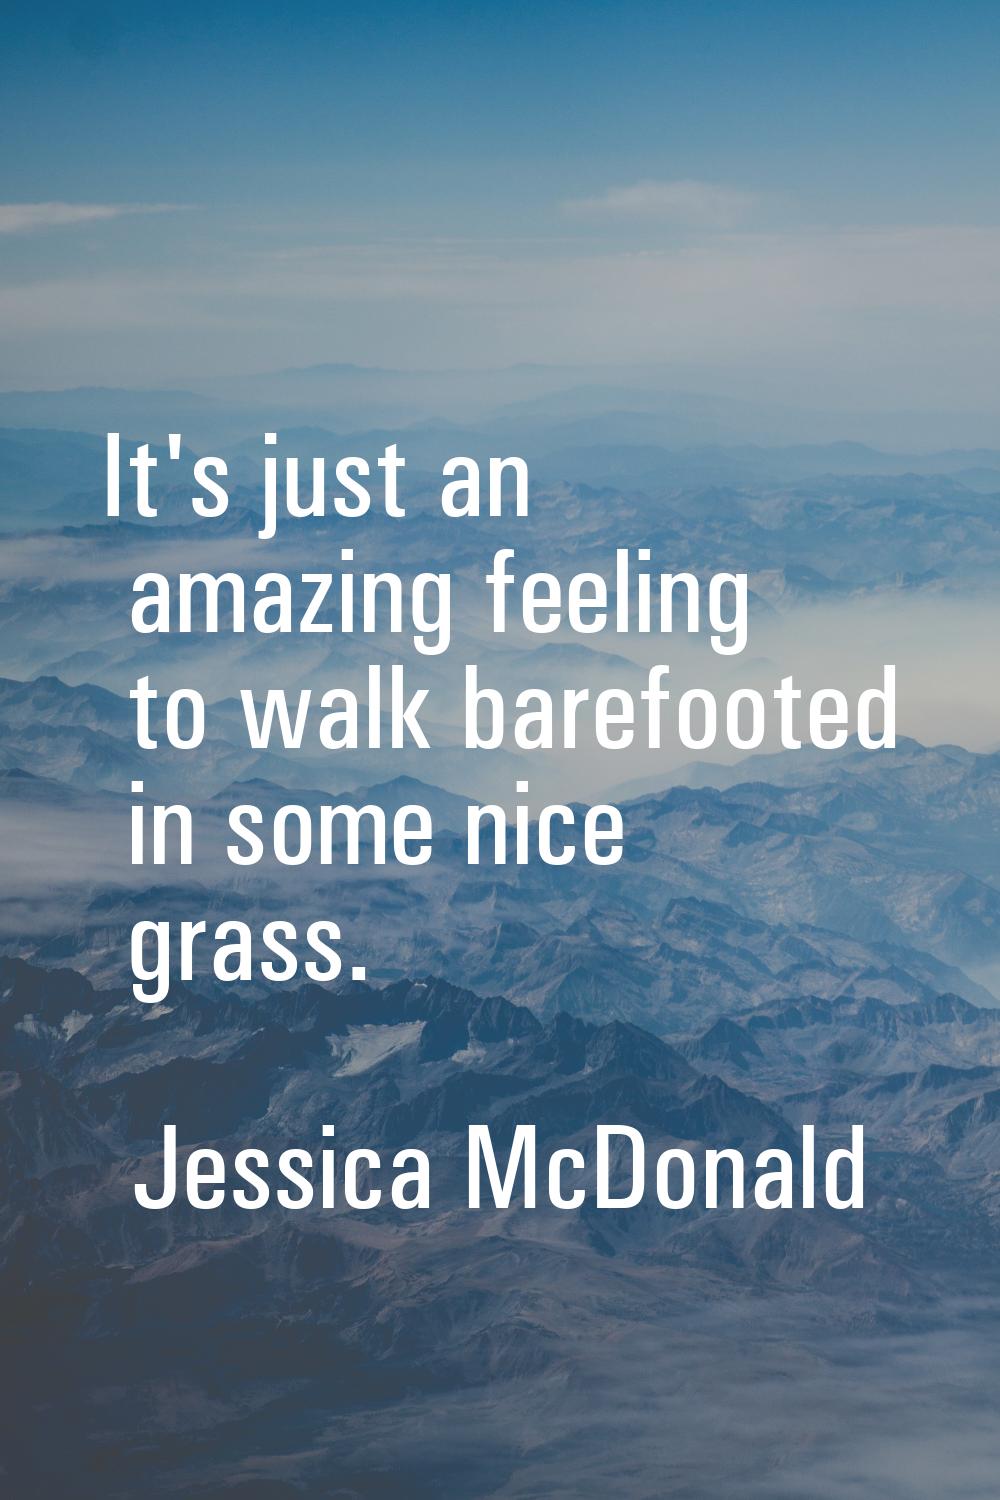 It's just an amazing feeling to walk barefooted in some nice grass.